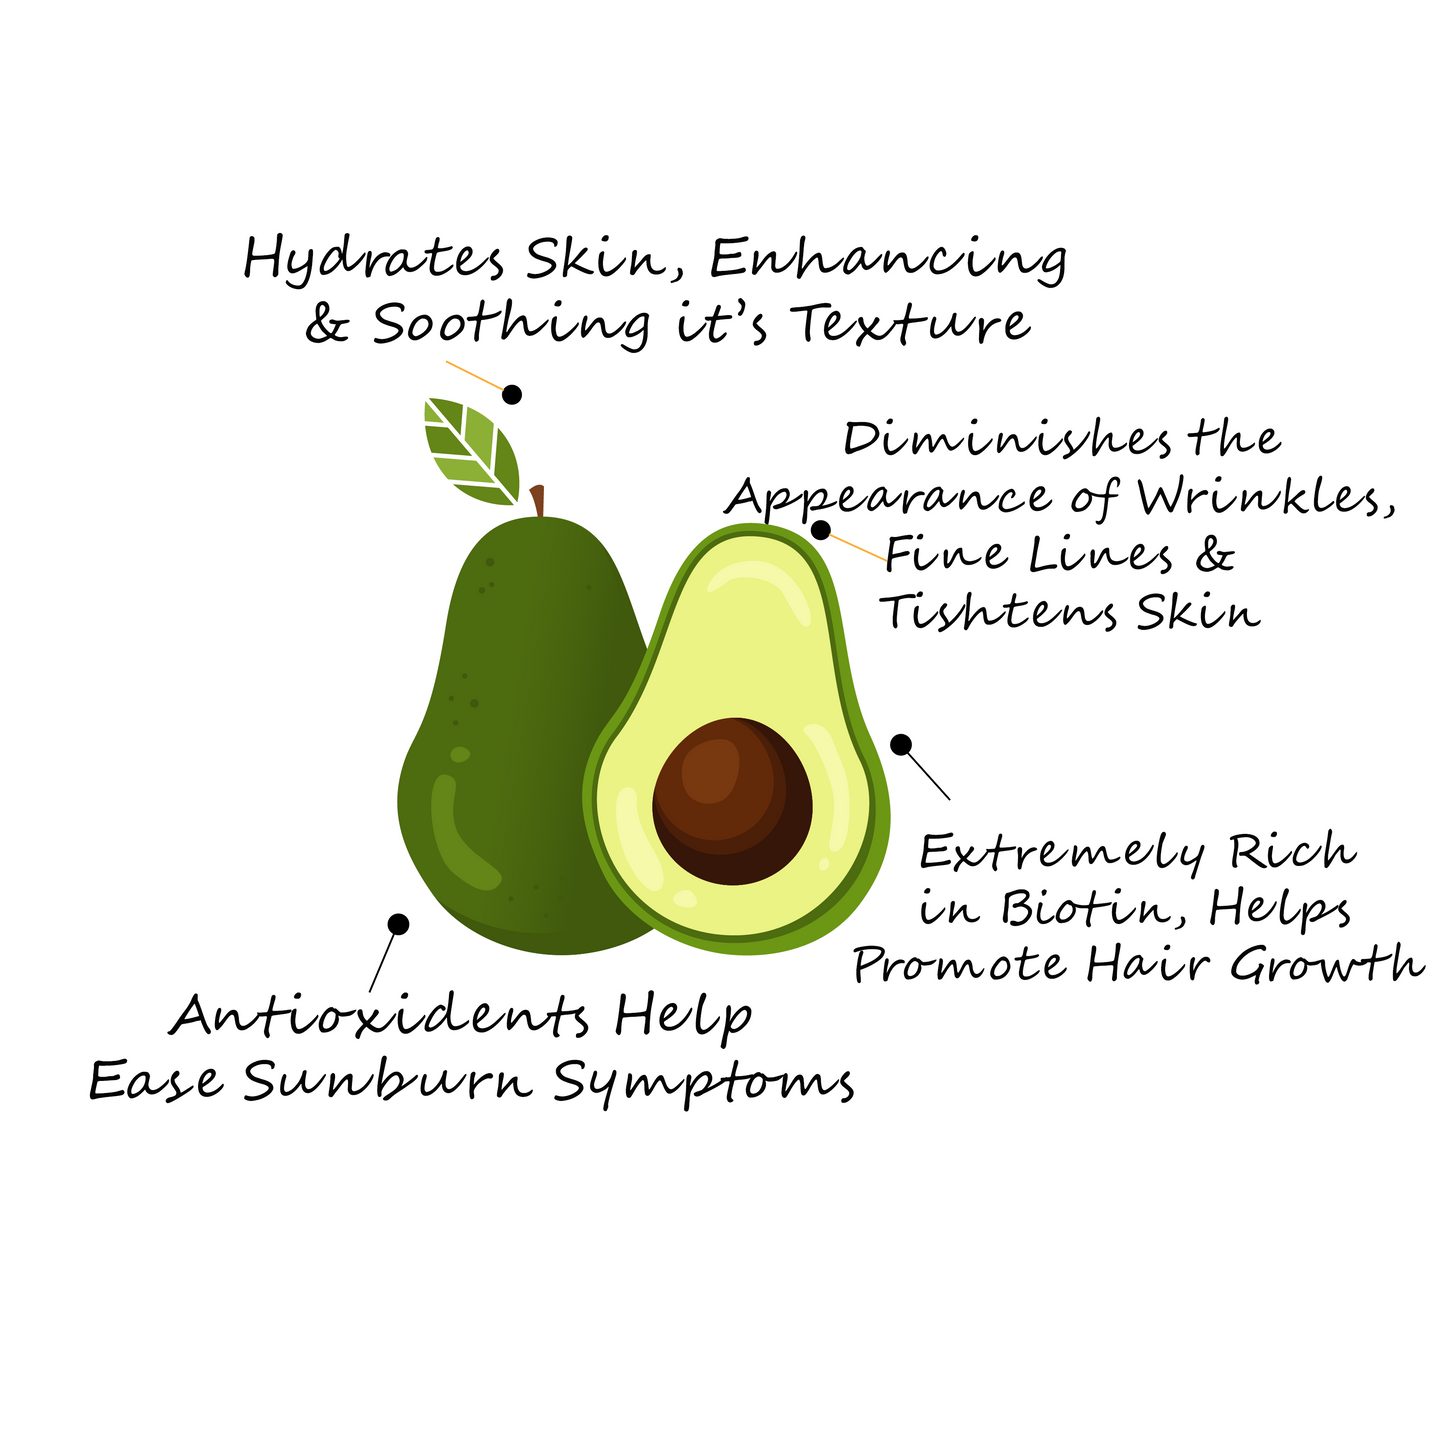 Avocado Oil | Repair Dry, Damaged Hair | Natural Sunscreen | Helps with fine lines & wrinkles |